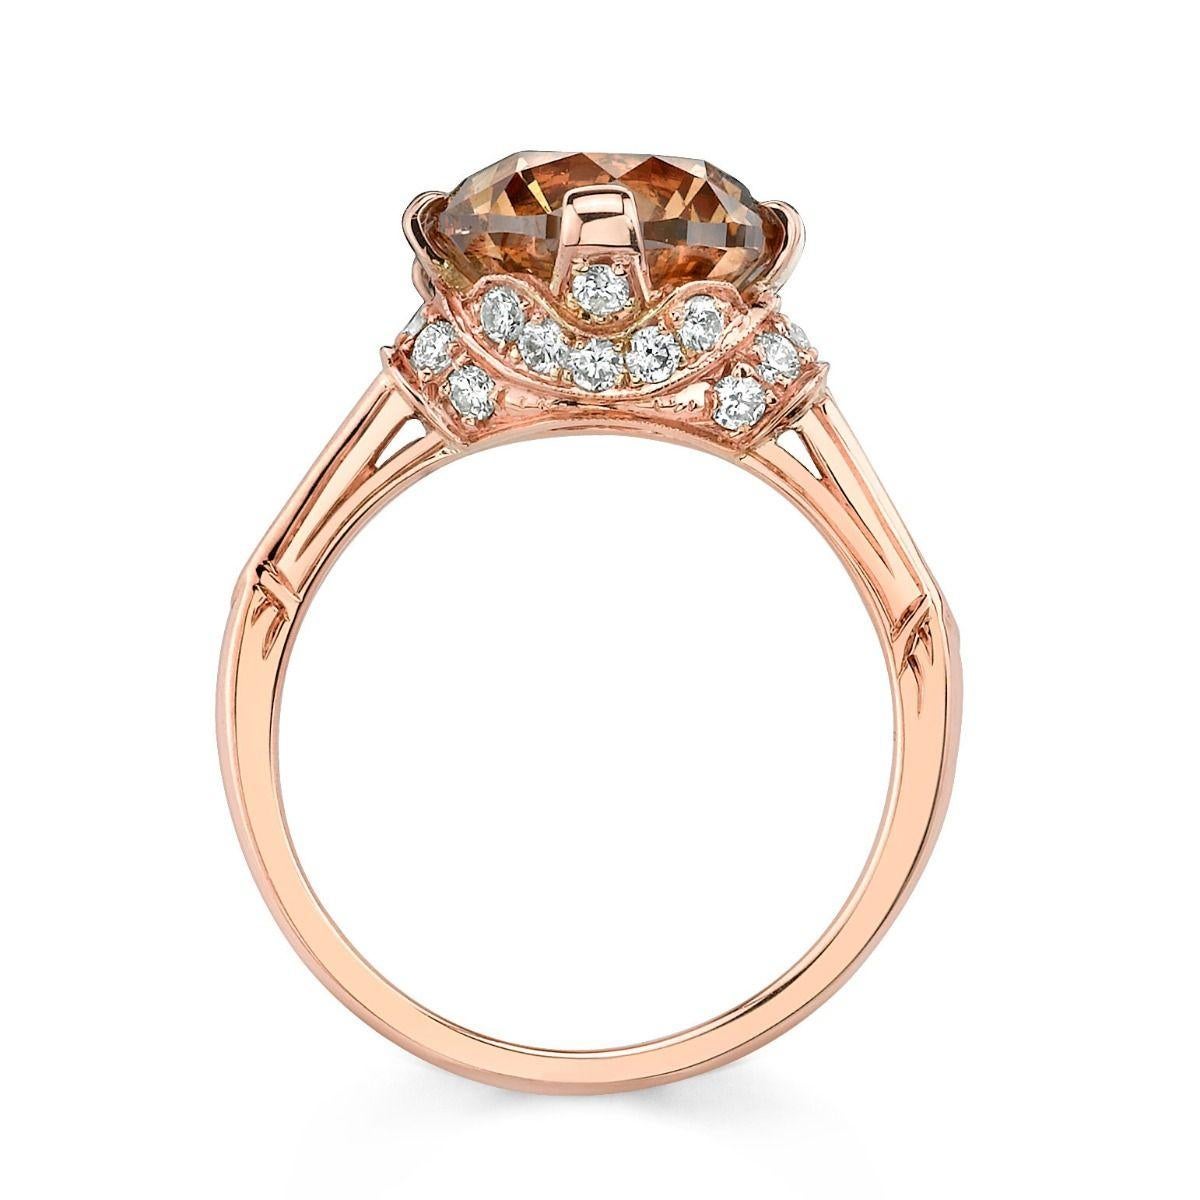 This warm combination of colors set in 18K rose gold embracing  an impressive sienna-colored diamond weighing 4.00cts. that is classified Natural Fancy Dark Yellowish Brown. An accenting 30 diamonds sharing 0.54 cts. include a draping series that